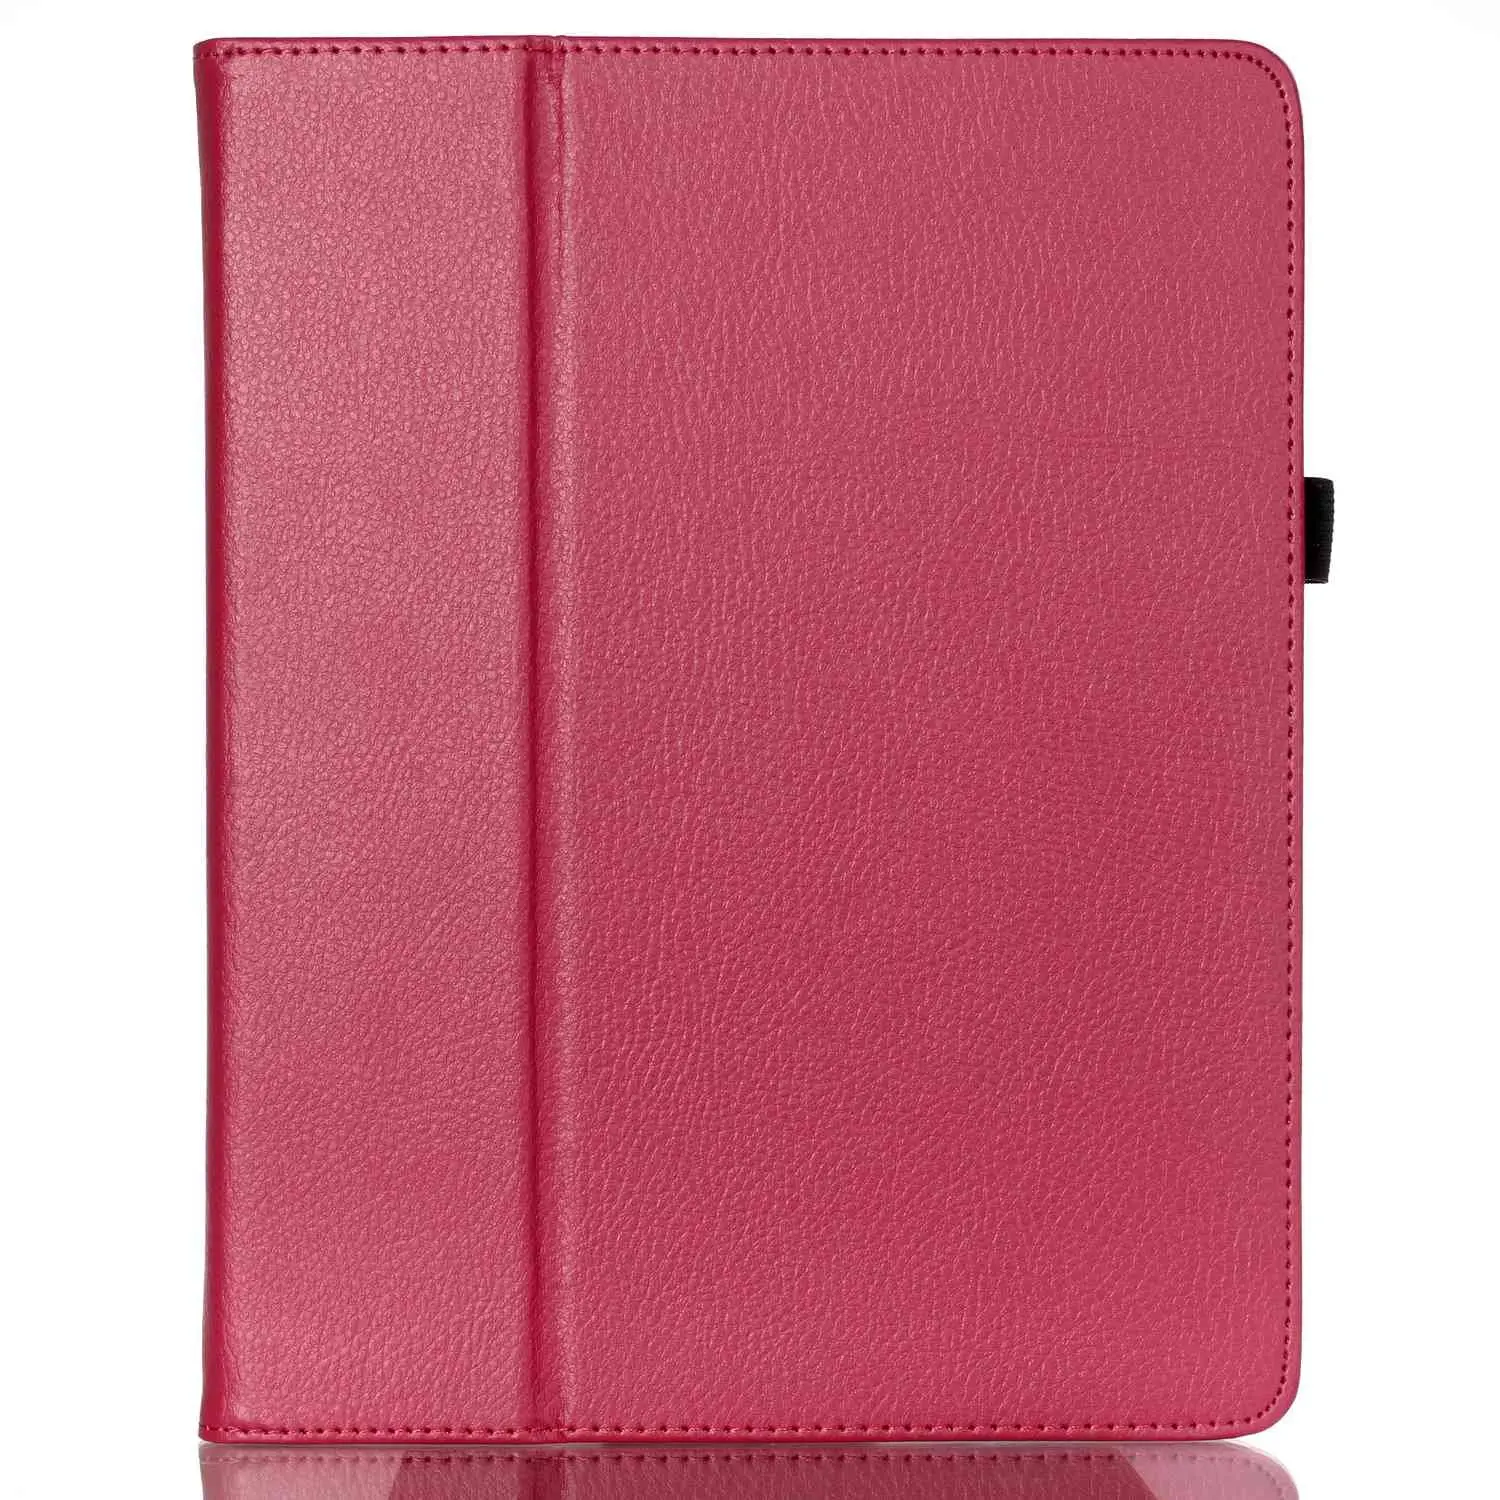 For iPad 2 3 4 Case with Apple Pencil Holder Cover,Premium Leather Folio Stand Cover Case for iPad 2 3 4 A1395 A1460 A1416 A1430 - Цвет: for iPad 2 3 4 rose